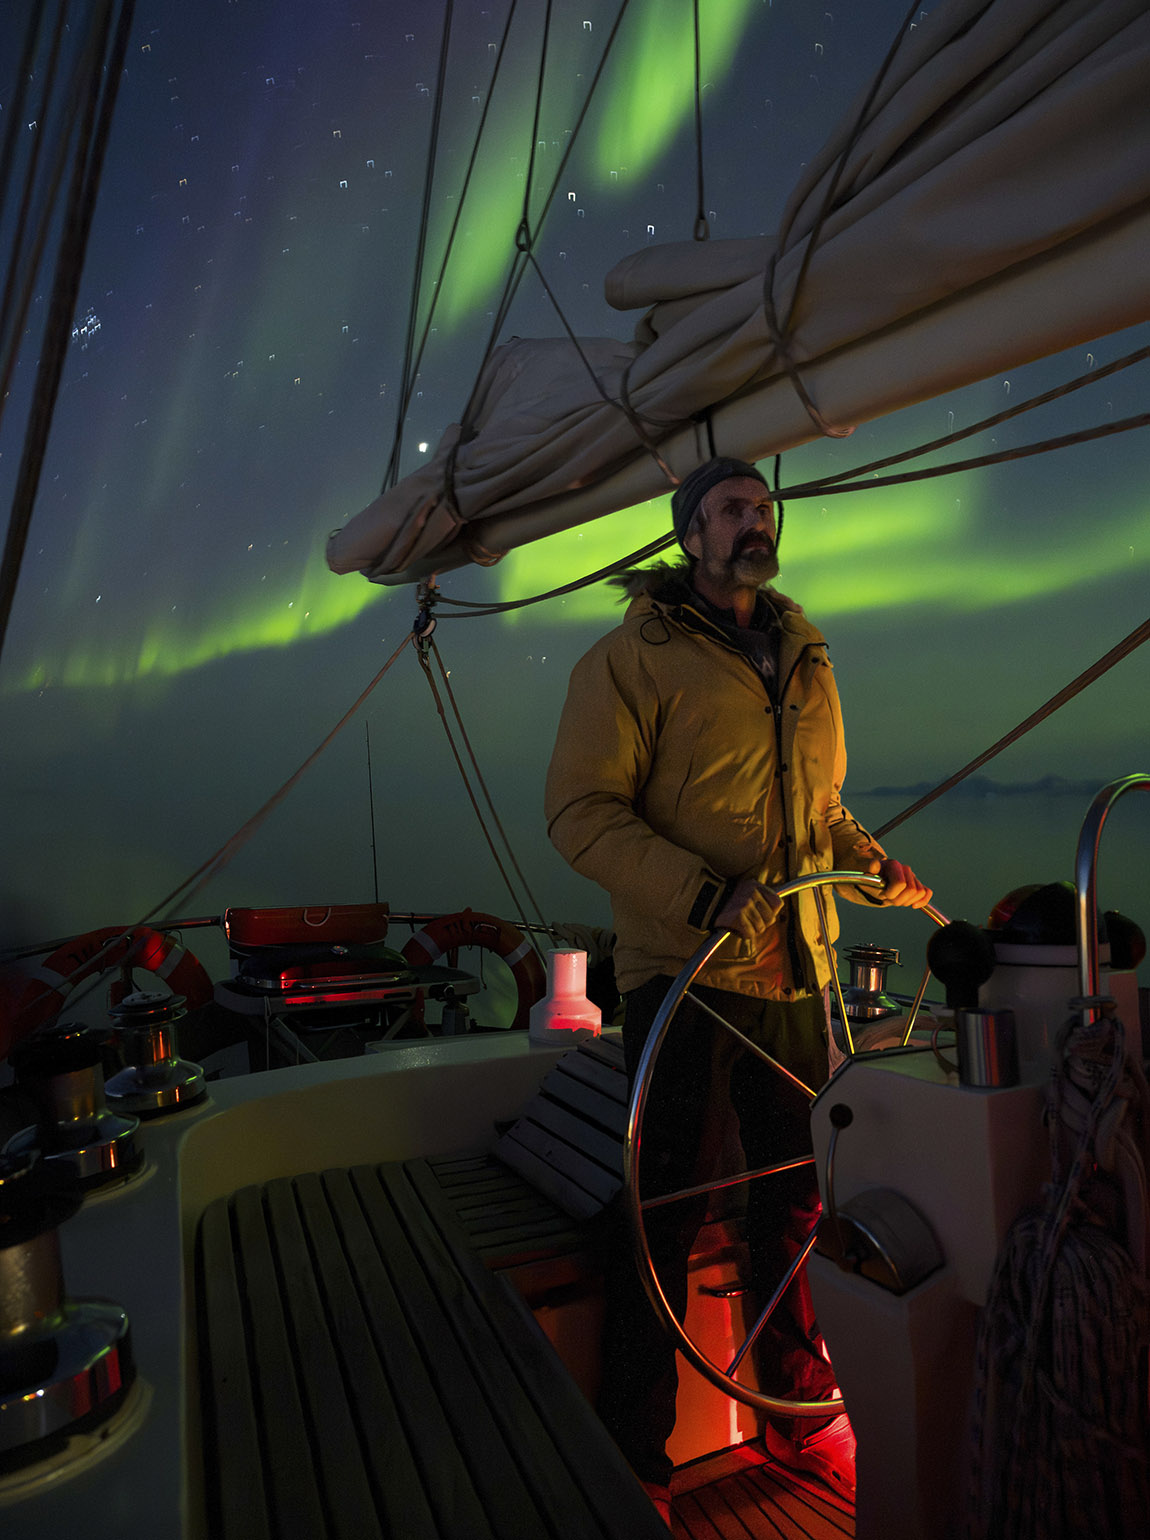 Tilvera Expedition: Explore and restore the beauty of the Arctic